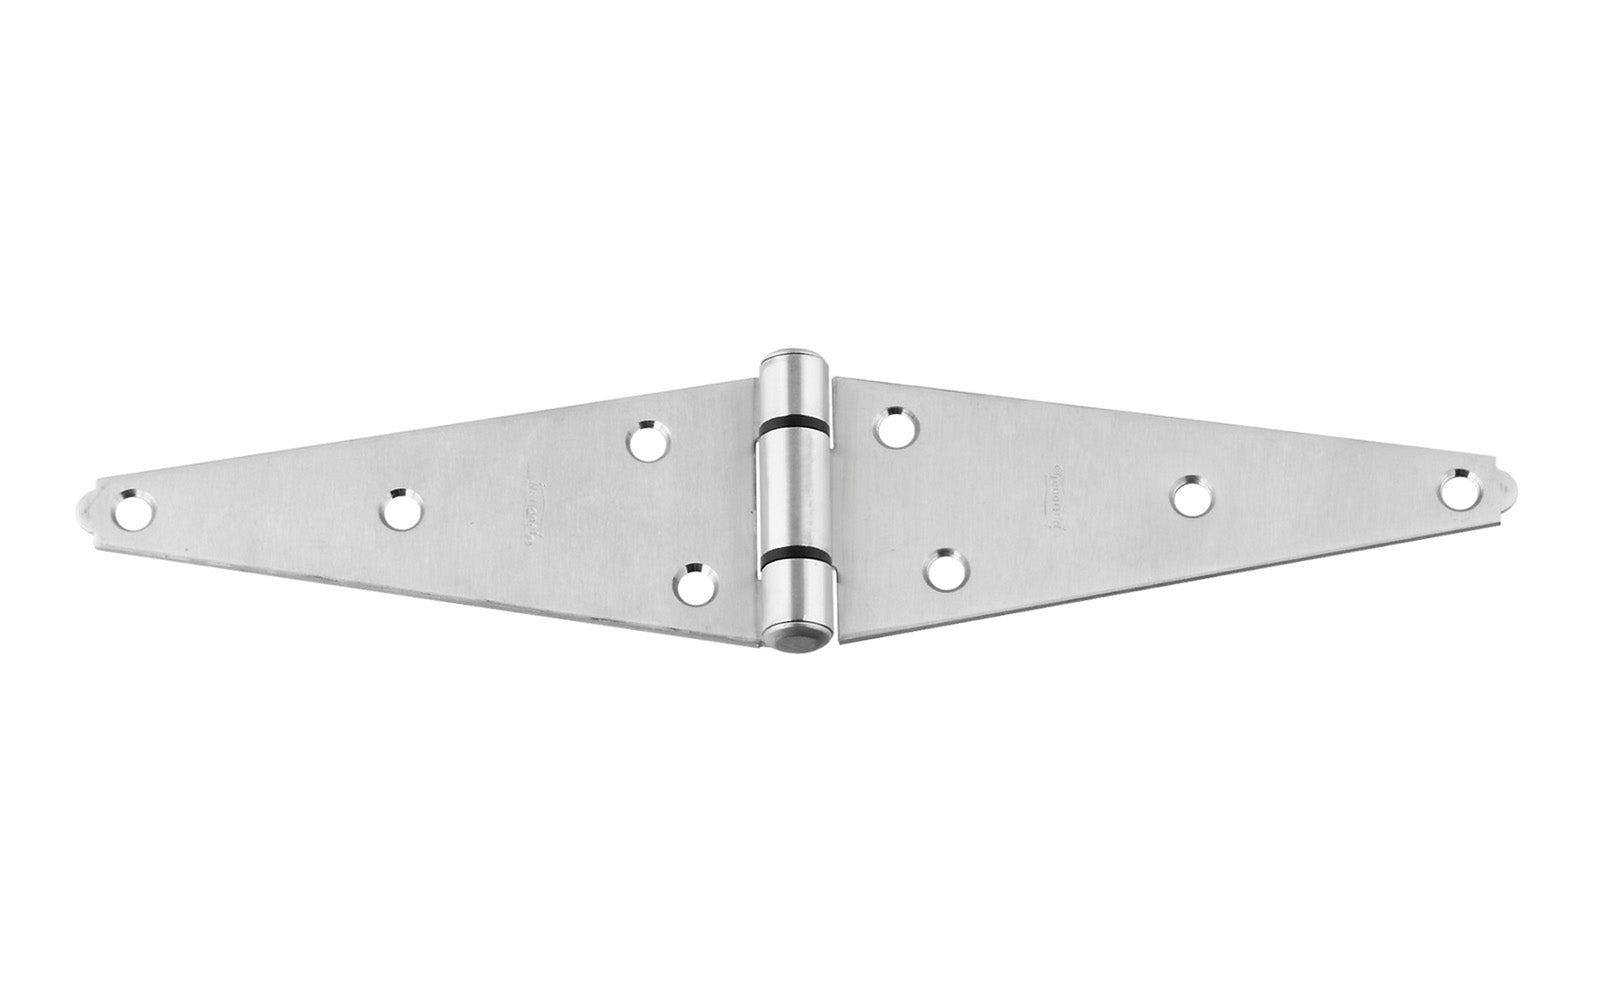 Heavy duty stainless strap hinge is for applications with wide mounting surfaces. Tight pin for right or left hand applications. Rust-resistant; ACQ safe - safe for use with premium woods like cedar & redwood. Bearing design eliminates metal-to-metal contact for smooth, quiet operation. 6